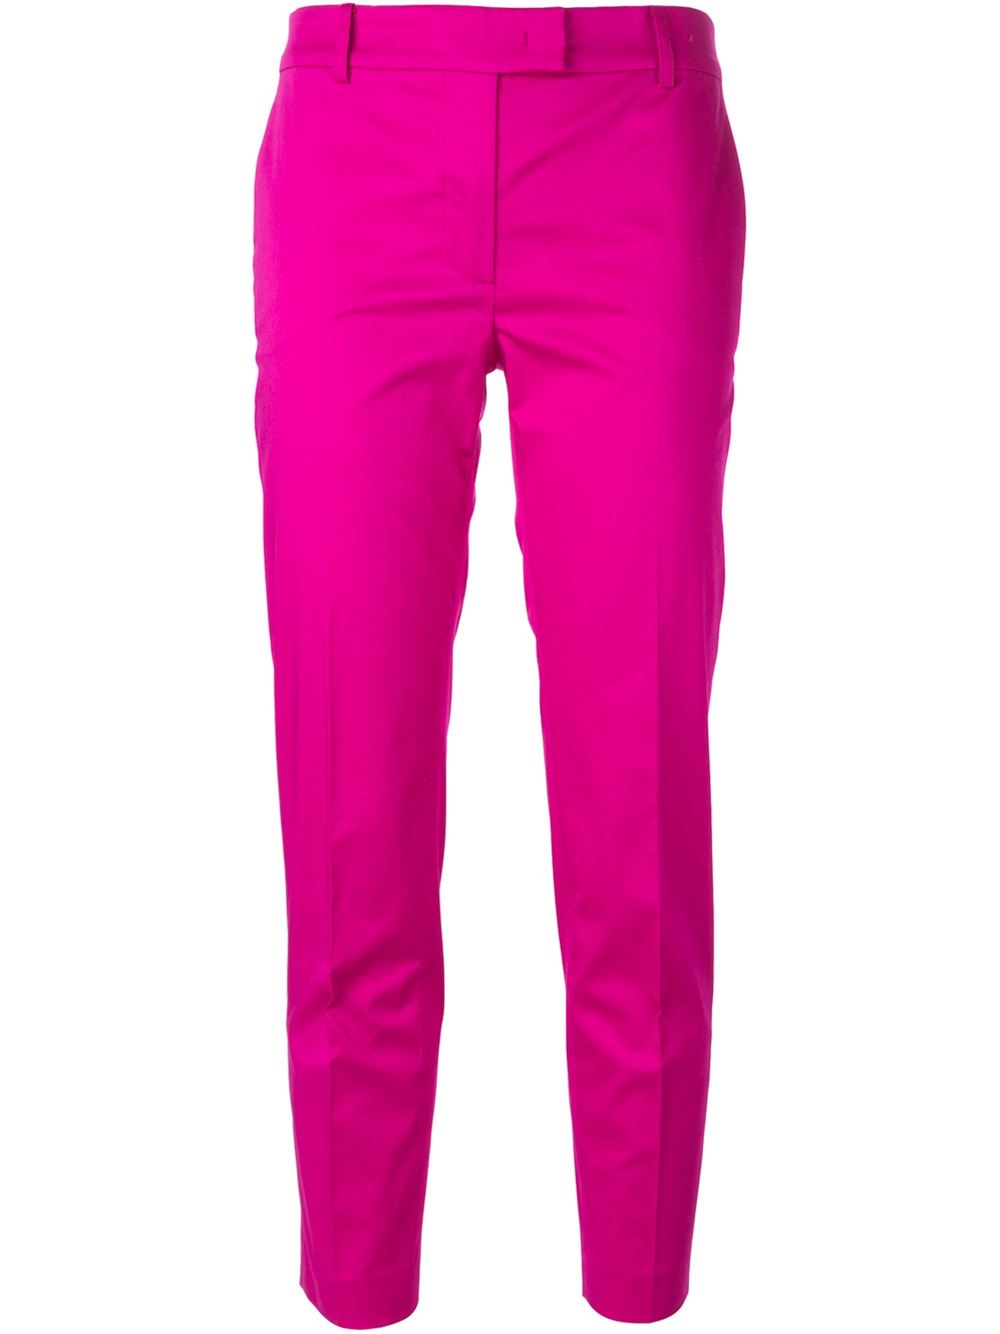 Moschino Cheap & Chic Cropped Cigarette Pants in Pink (pink & purple ...